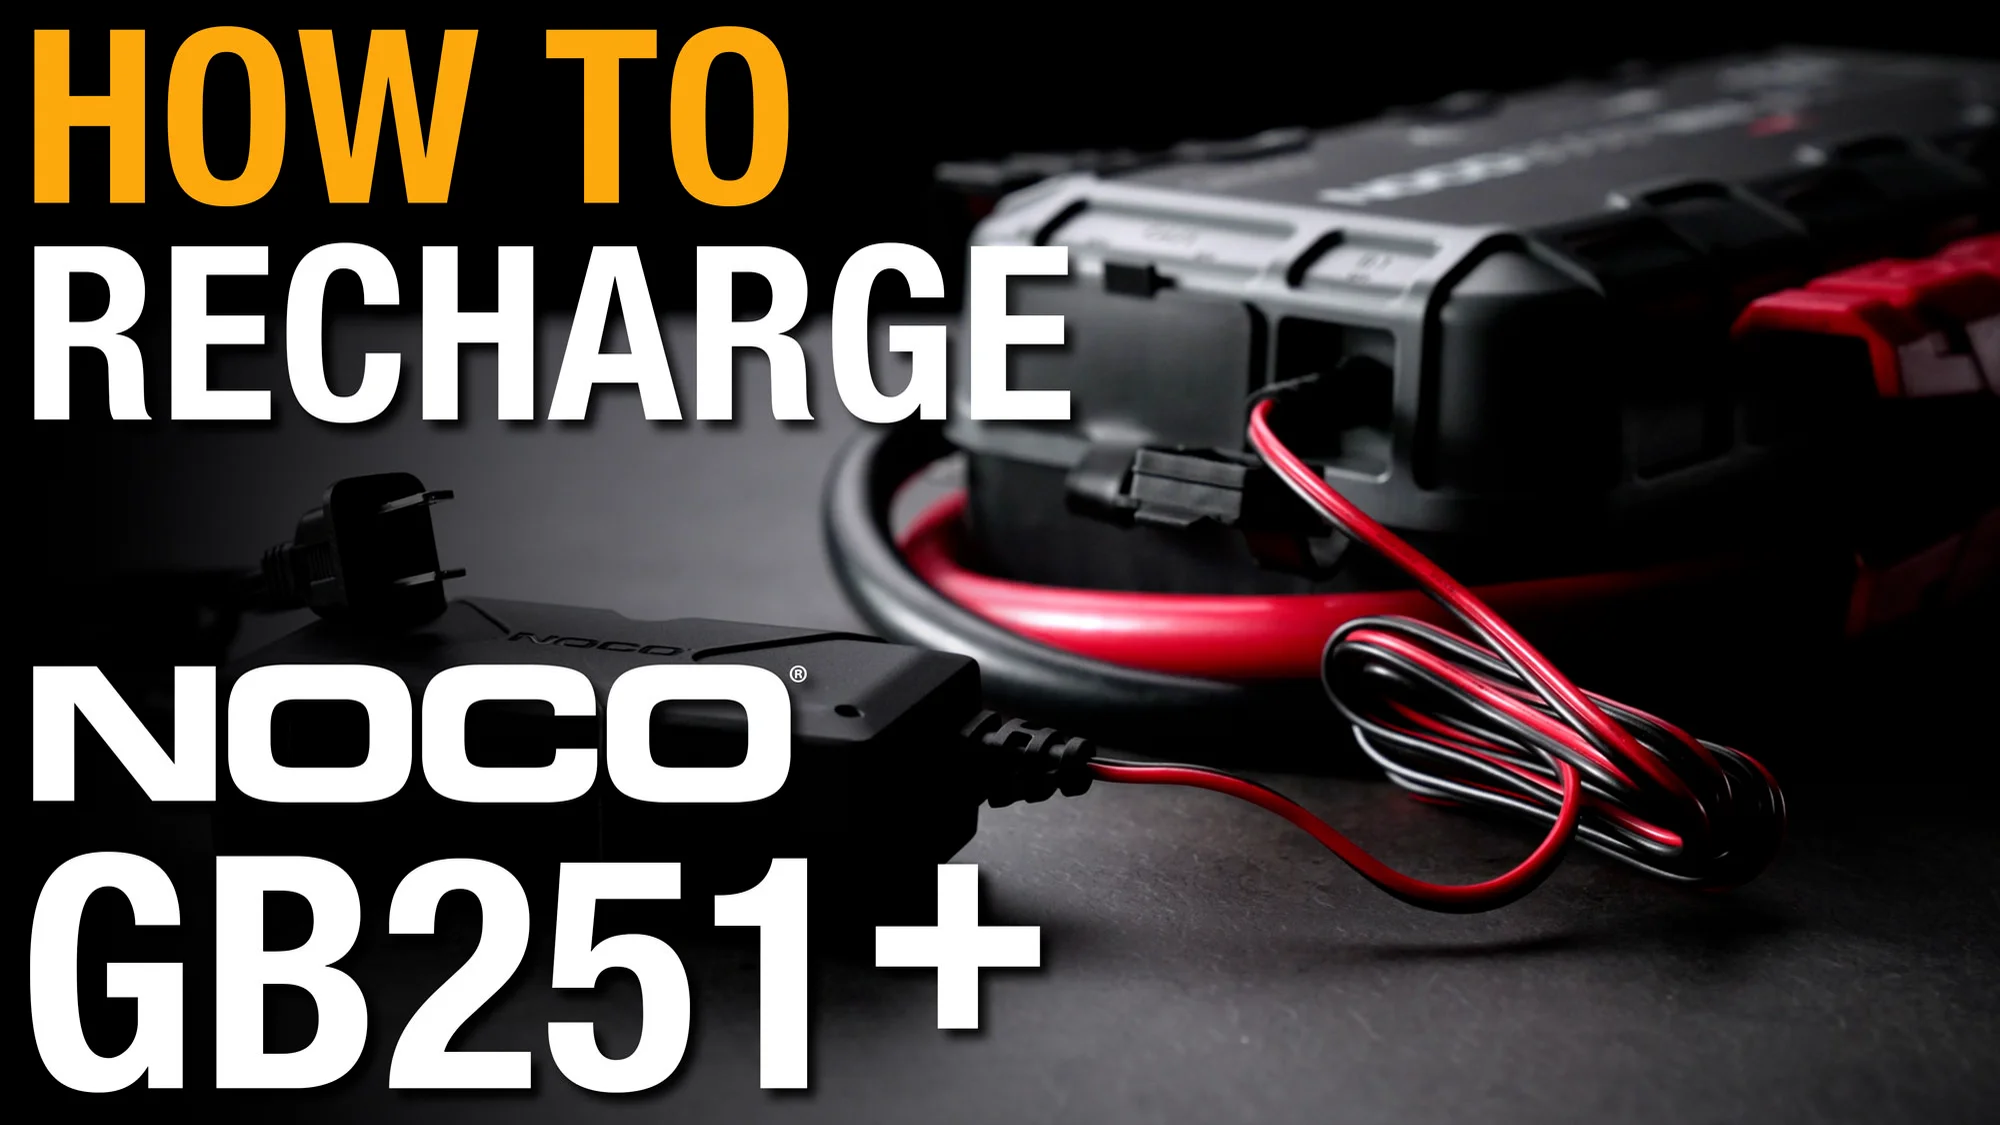 How to Recharge NOCO GB251+ on Vimeo